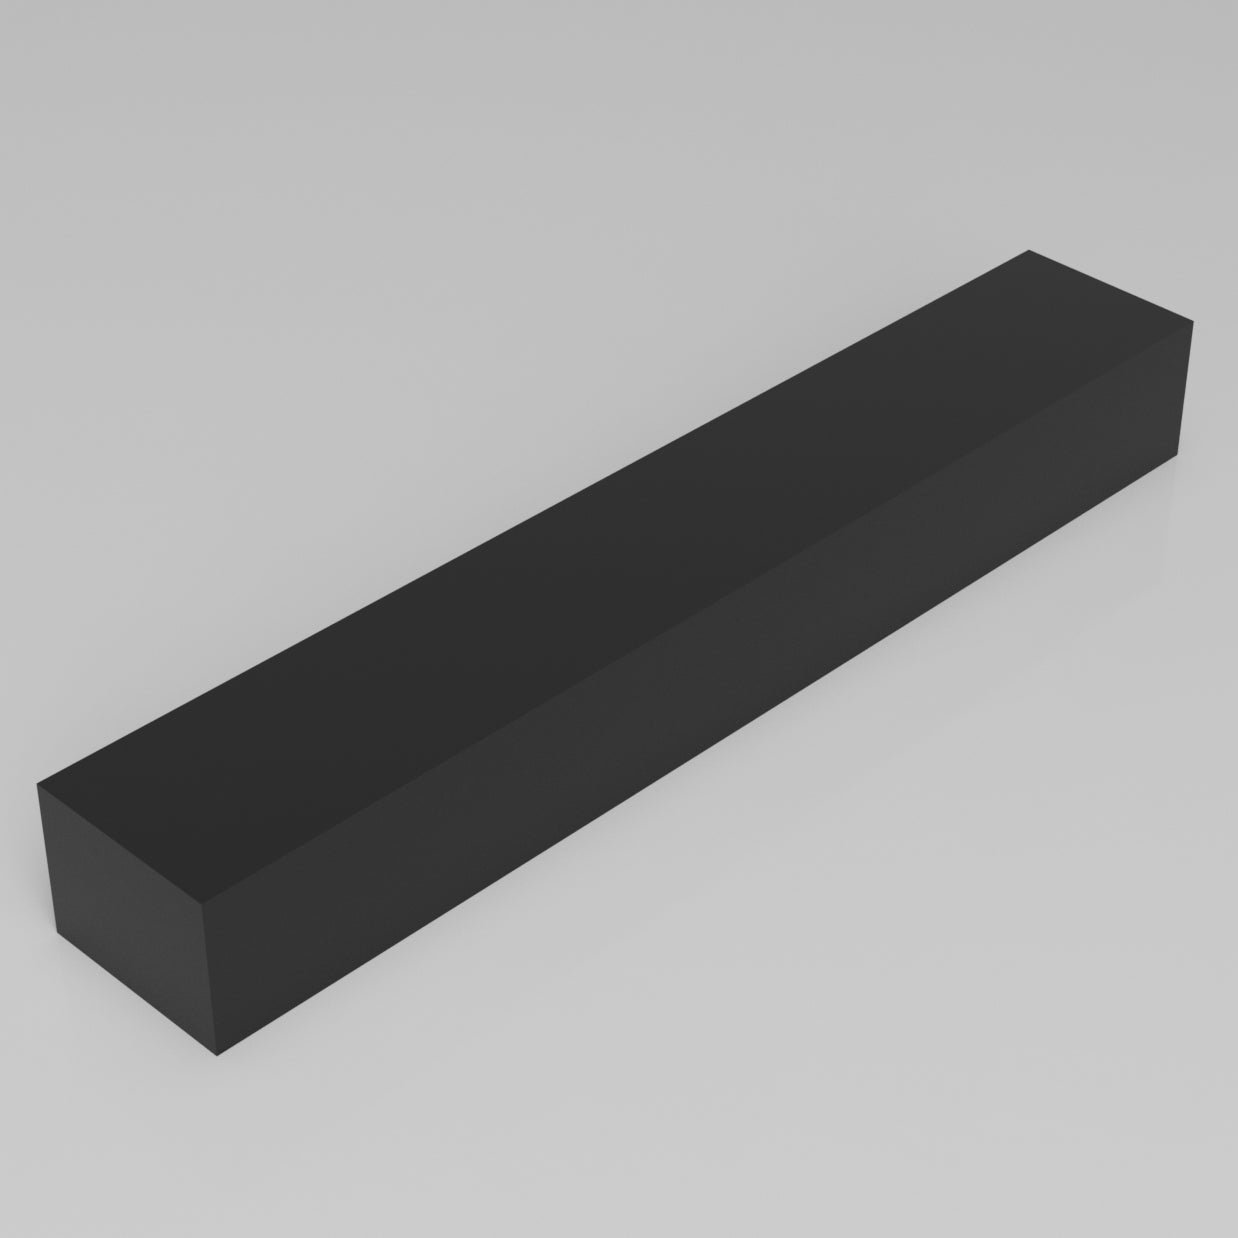 Machinable Wax Rectangular Block Front View 3 Inch by 4 Inch by 24 Inch